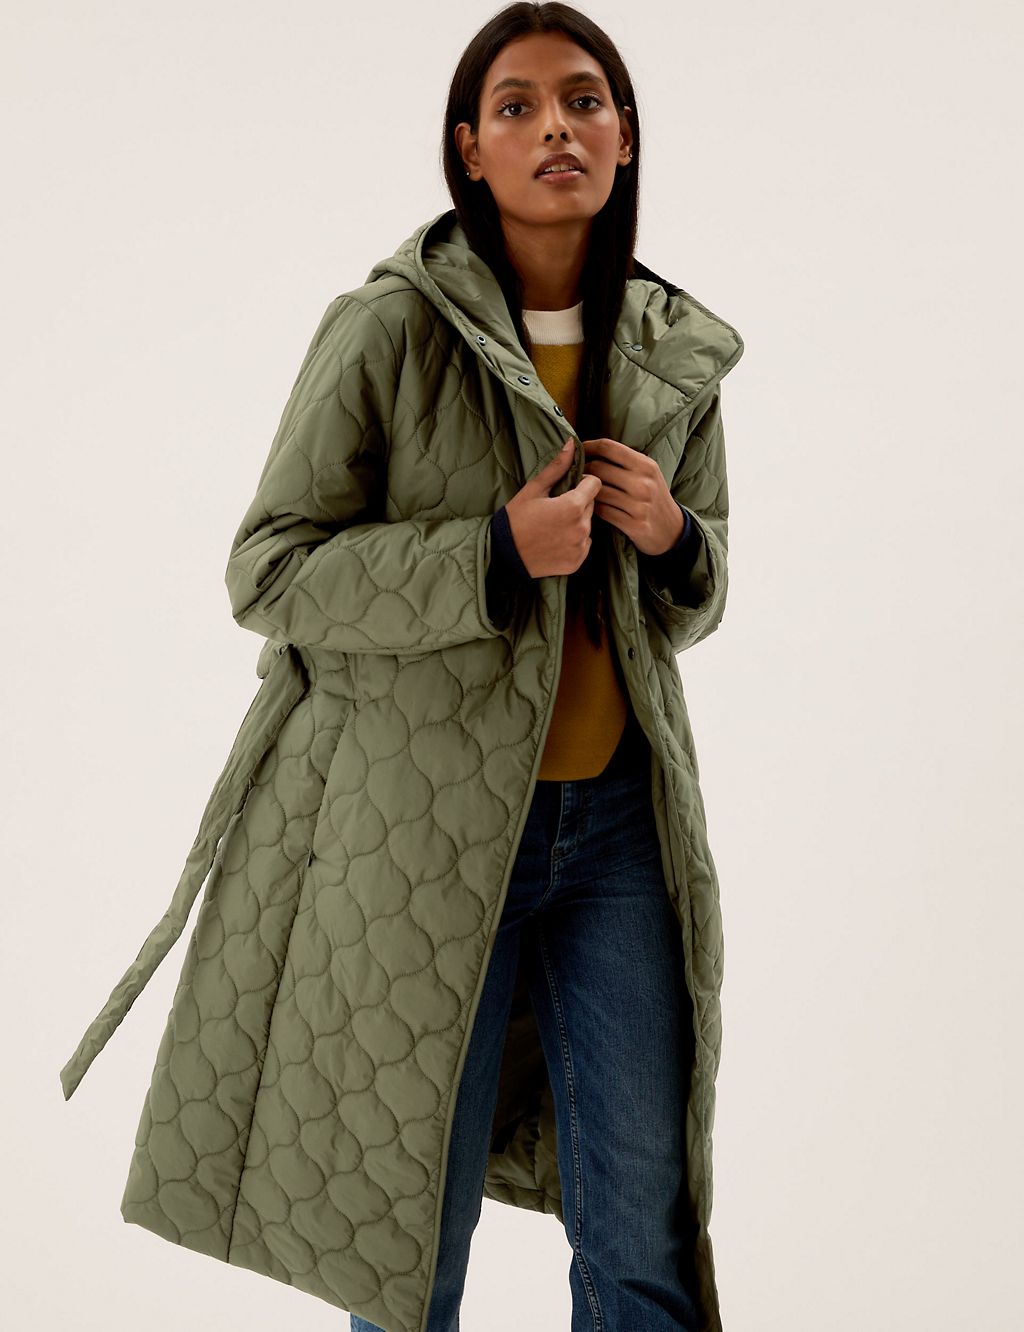 The Quilted Coat | M&S Collection | M&S